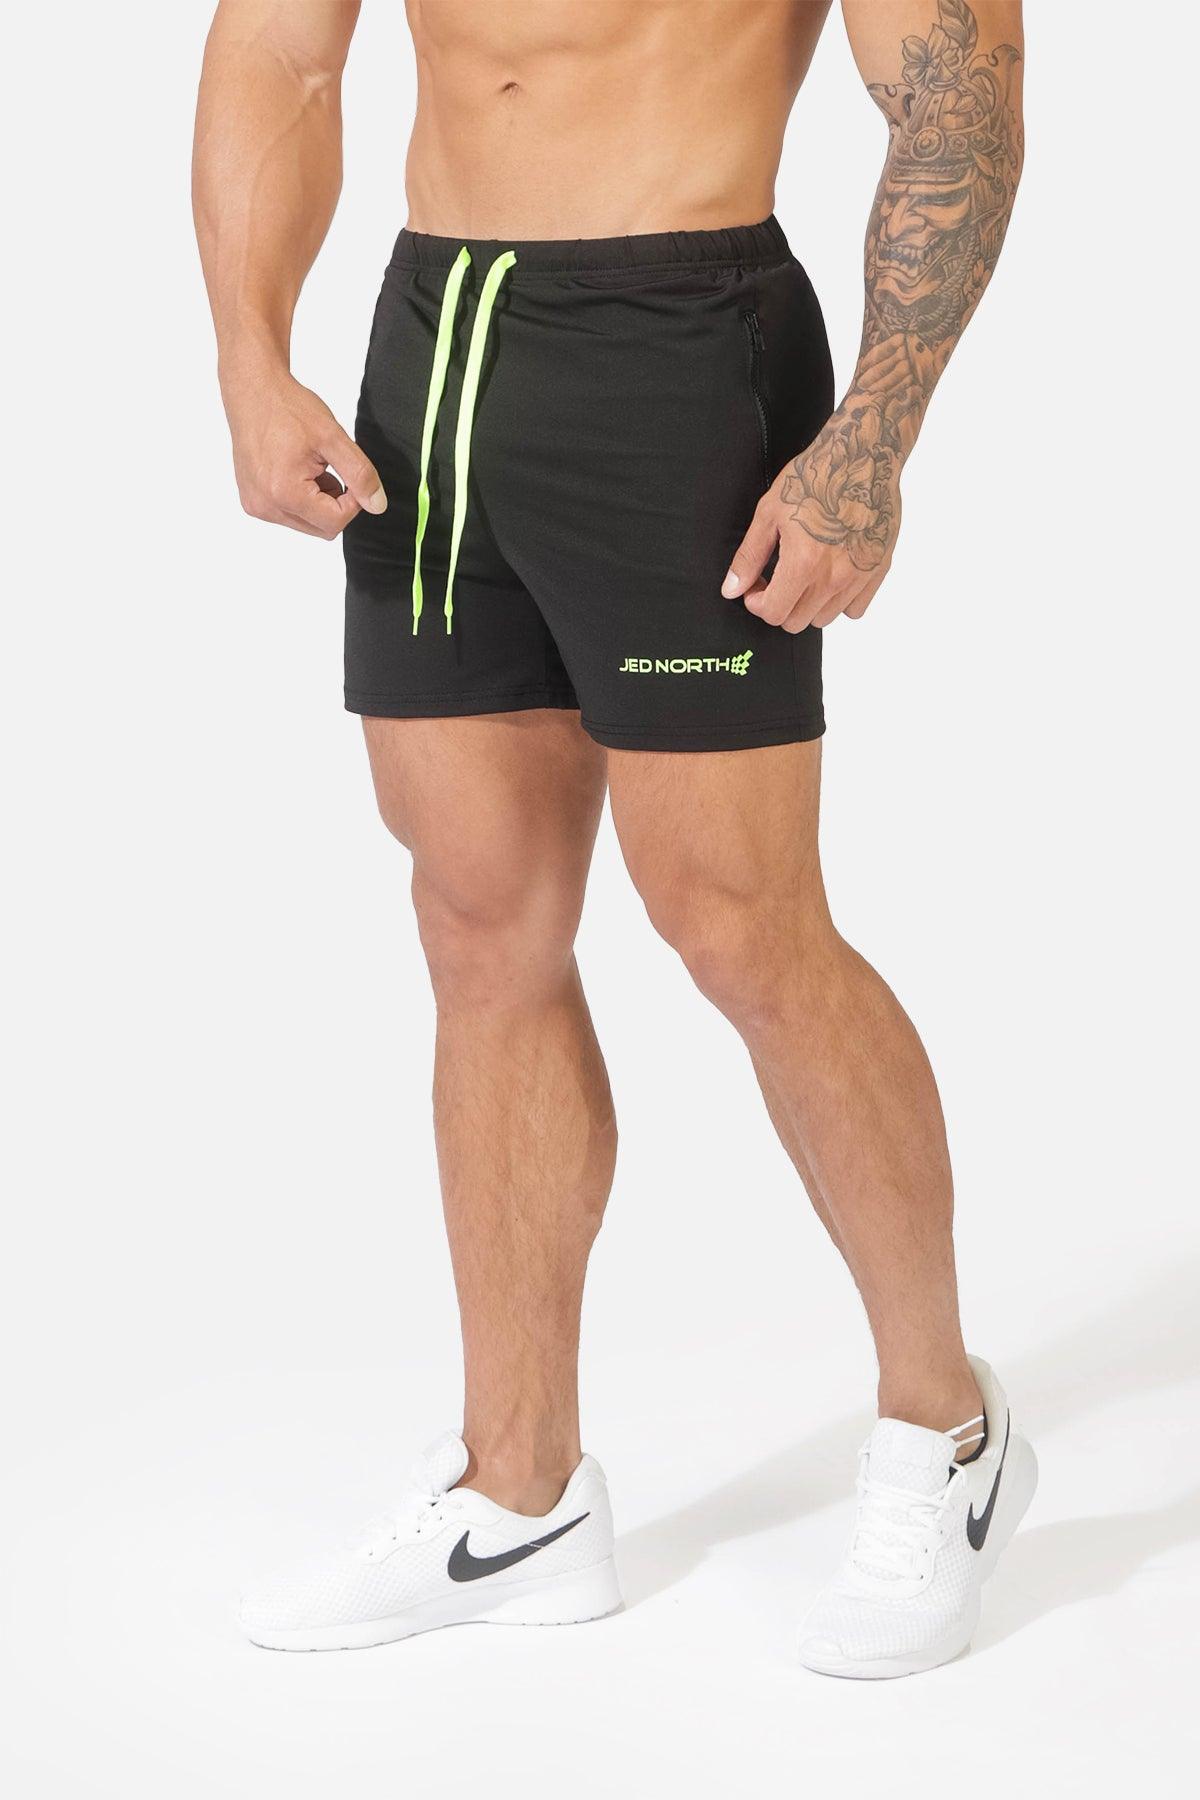 Gym North Men's Shorts Running Jed Bodybuilding Workout Tight